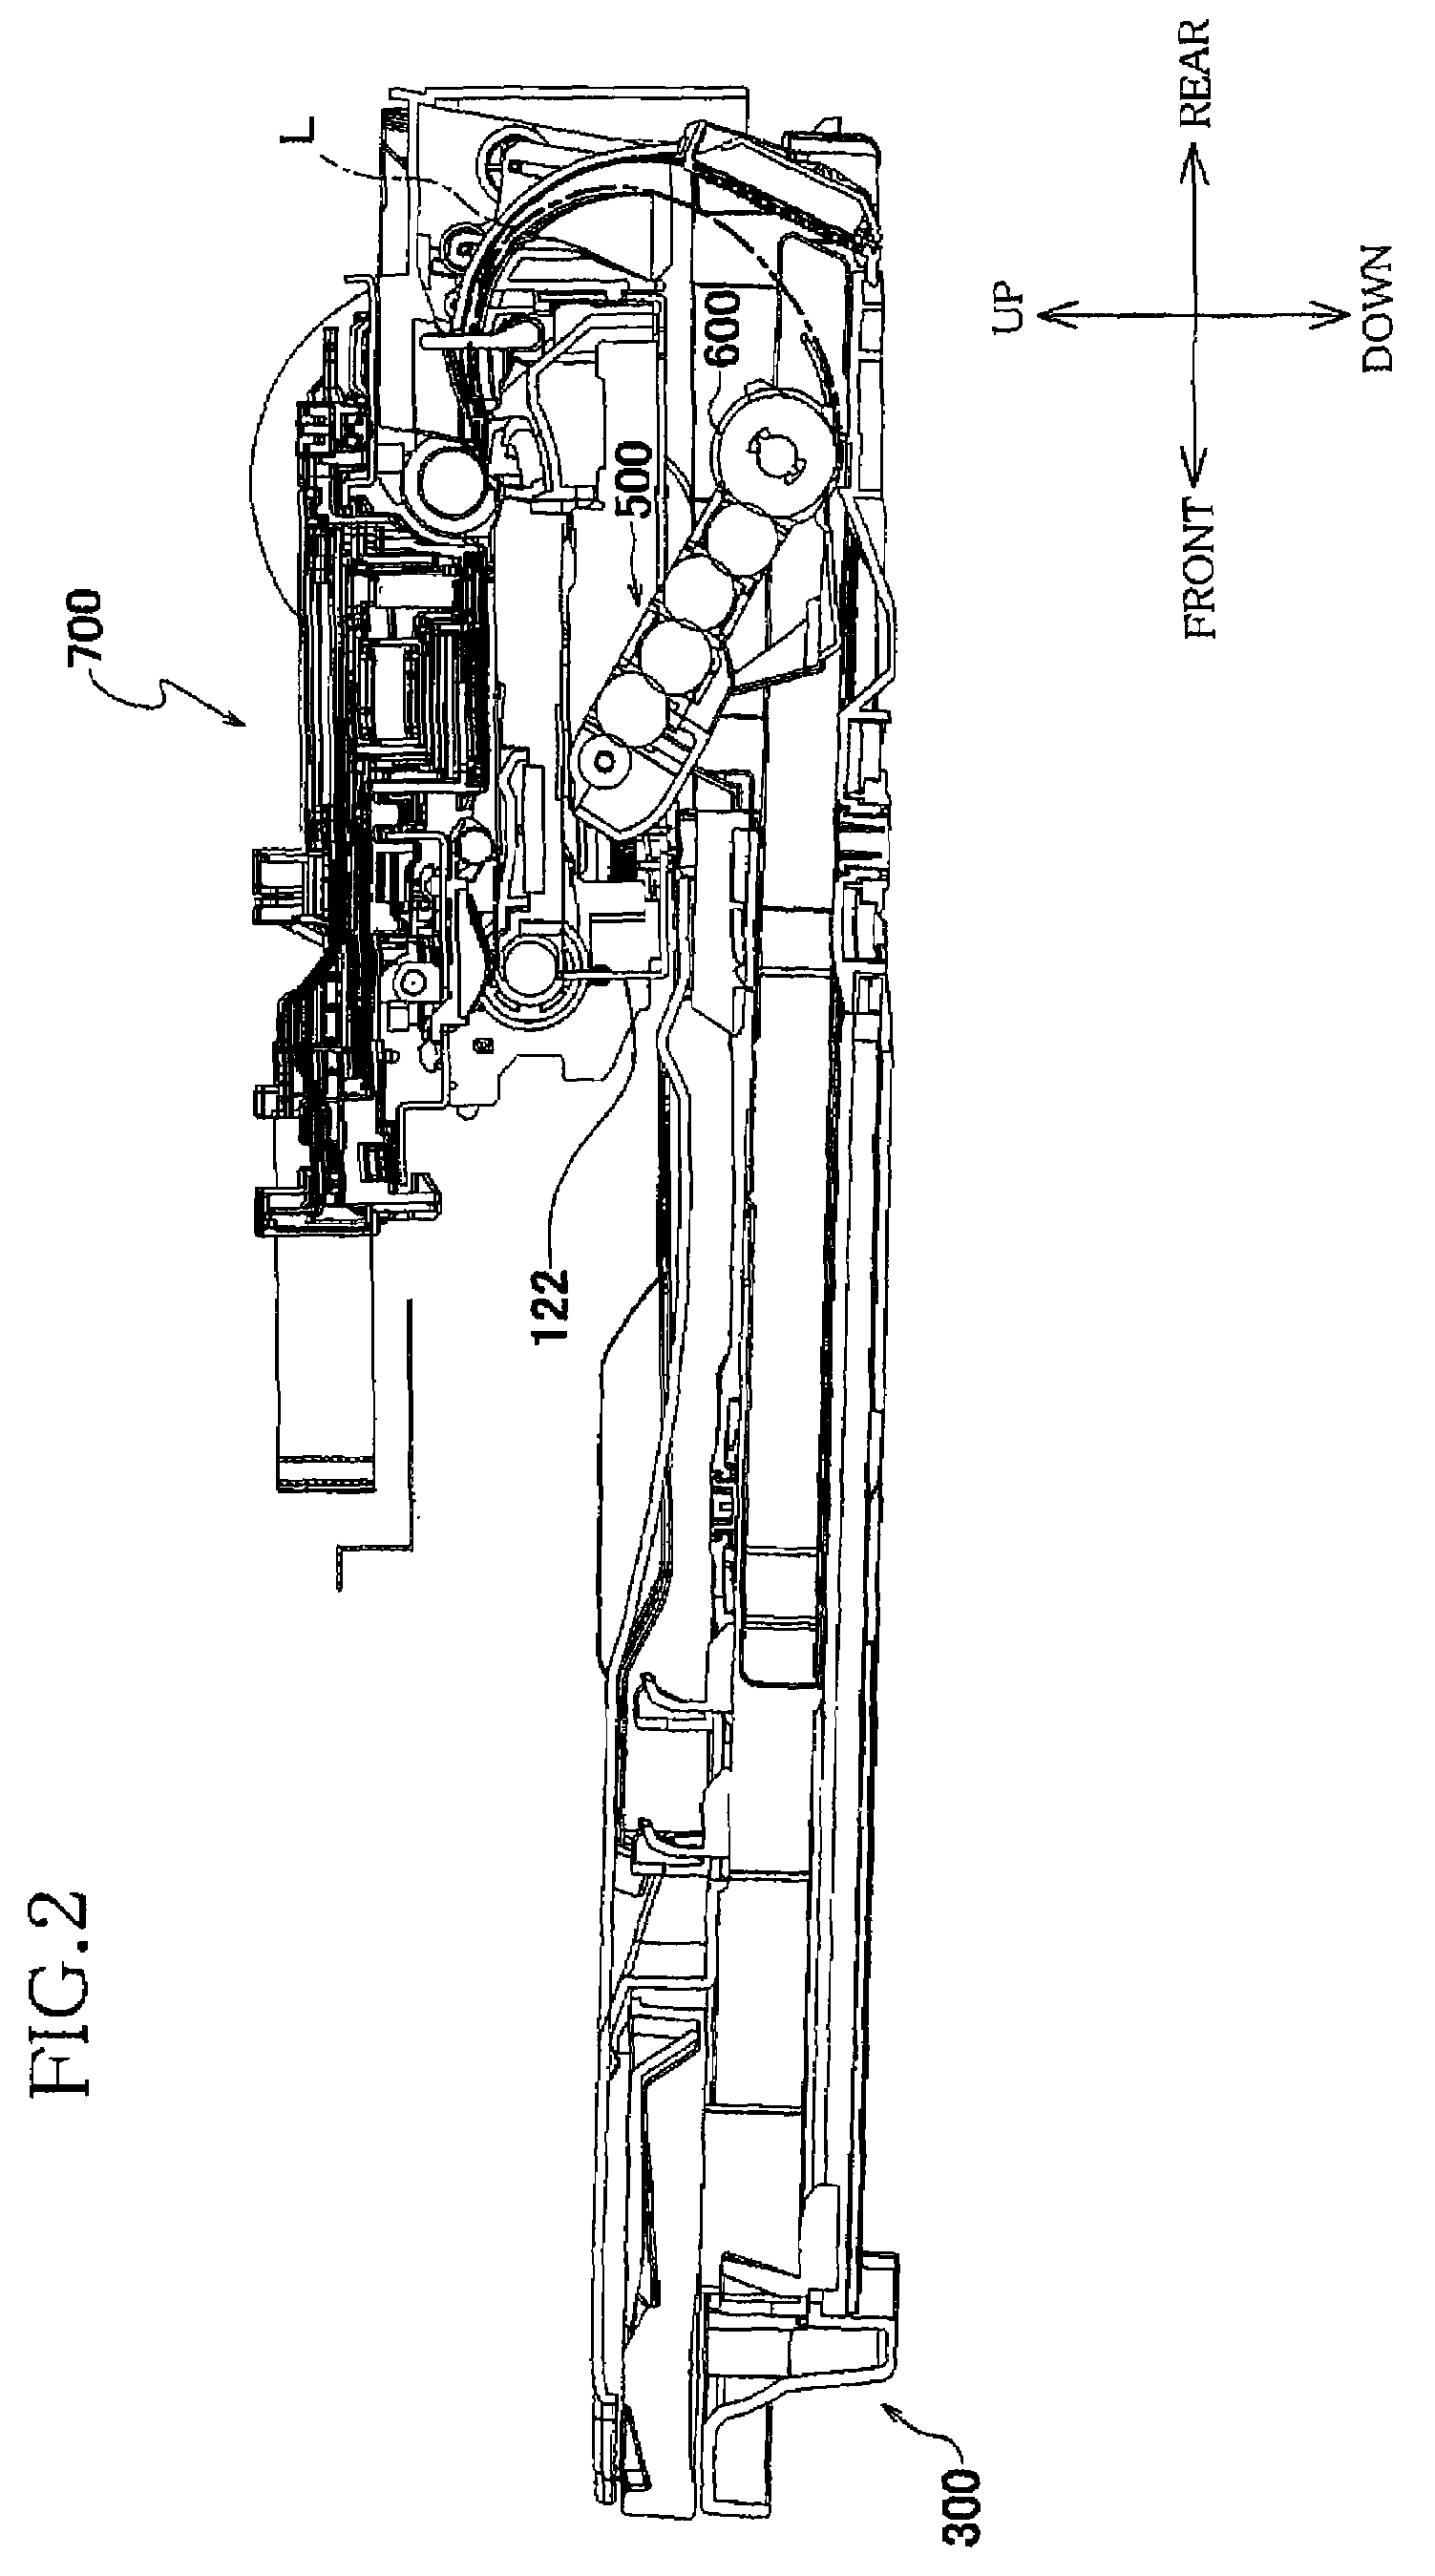 Sheet tray device and image forming apparatus having the sheet tray device